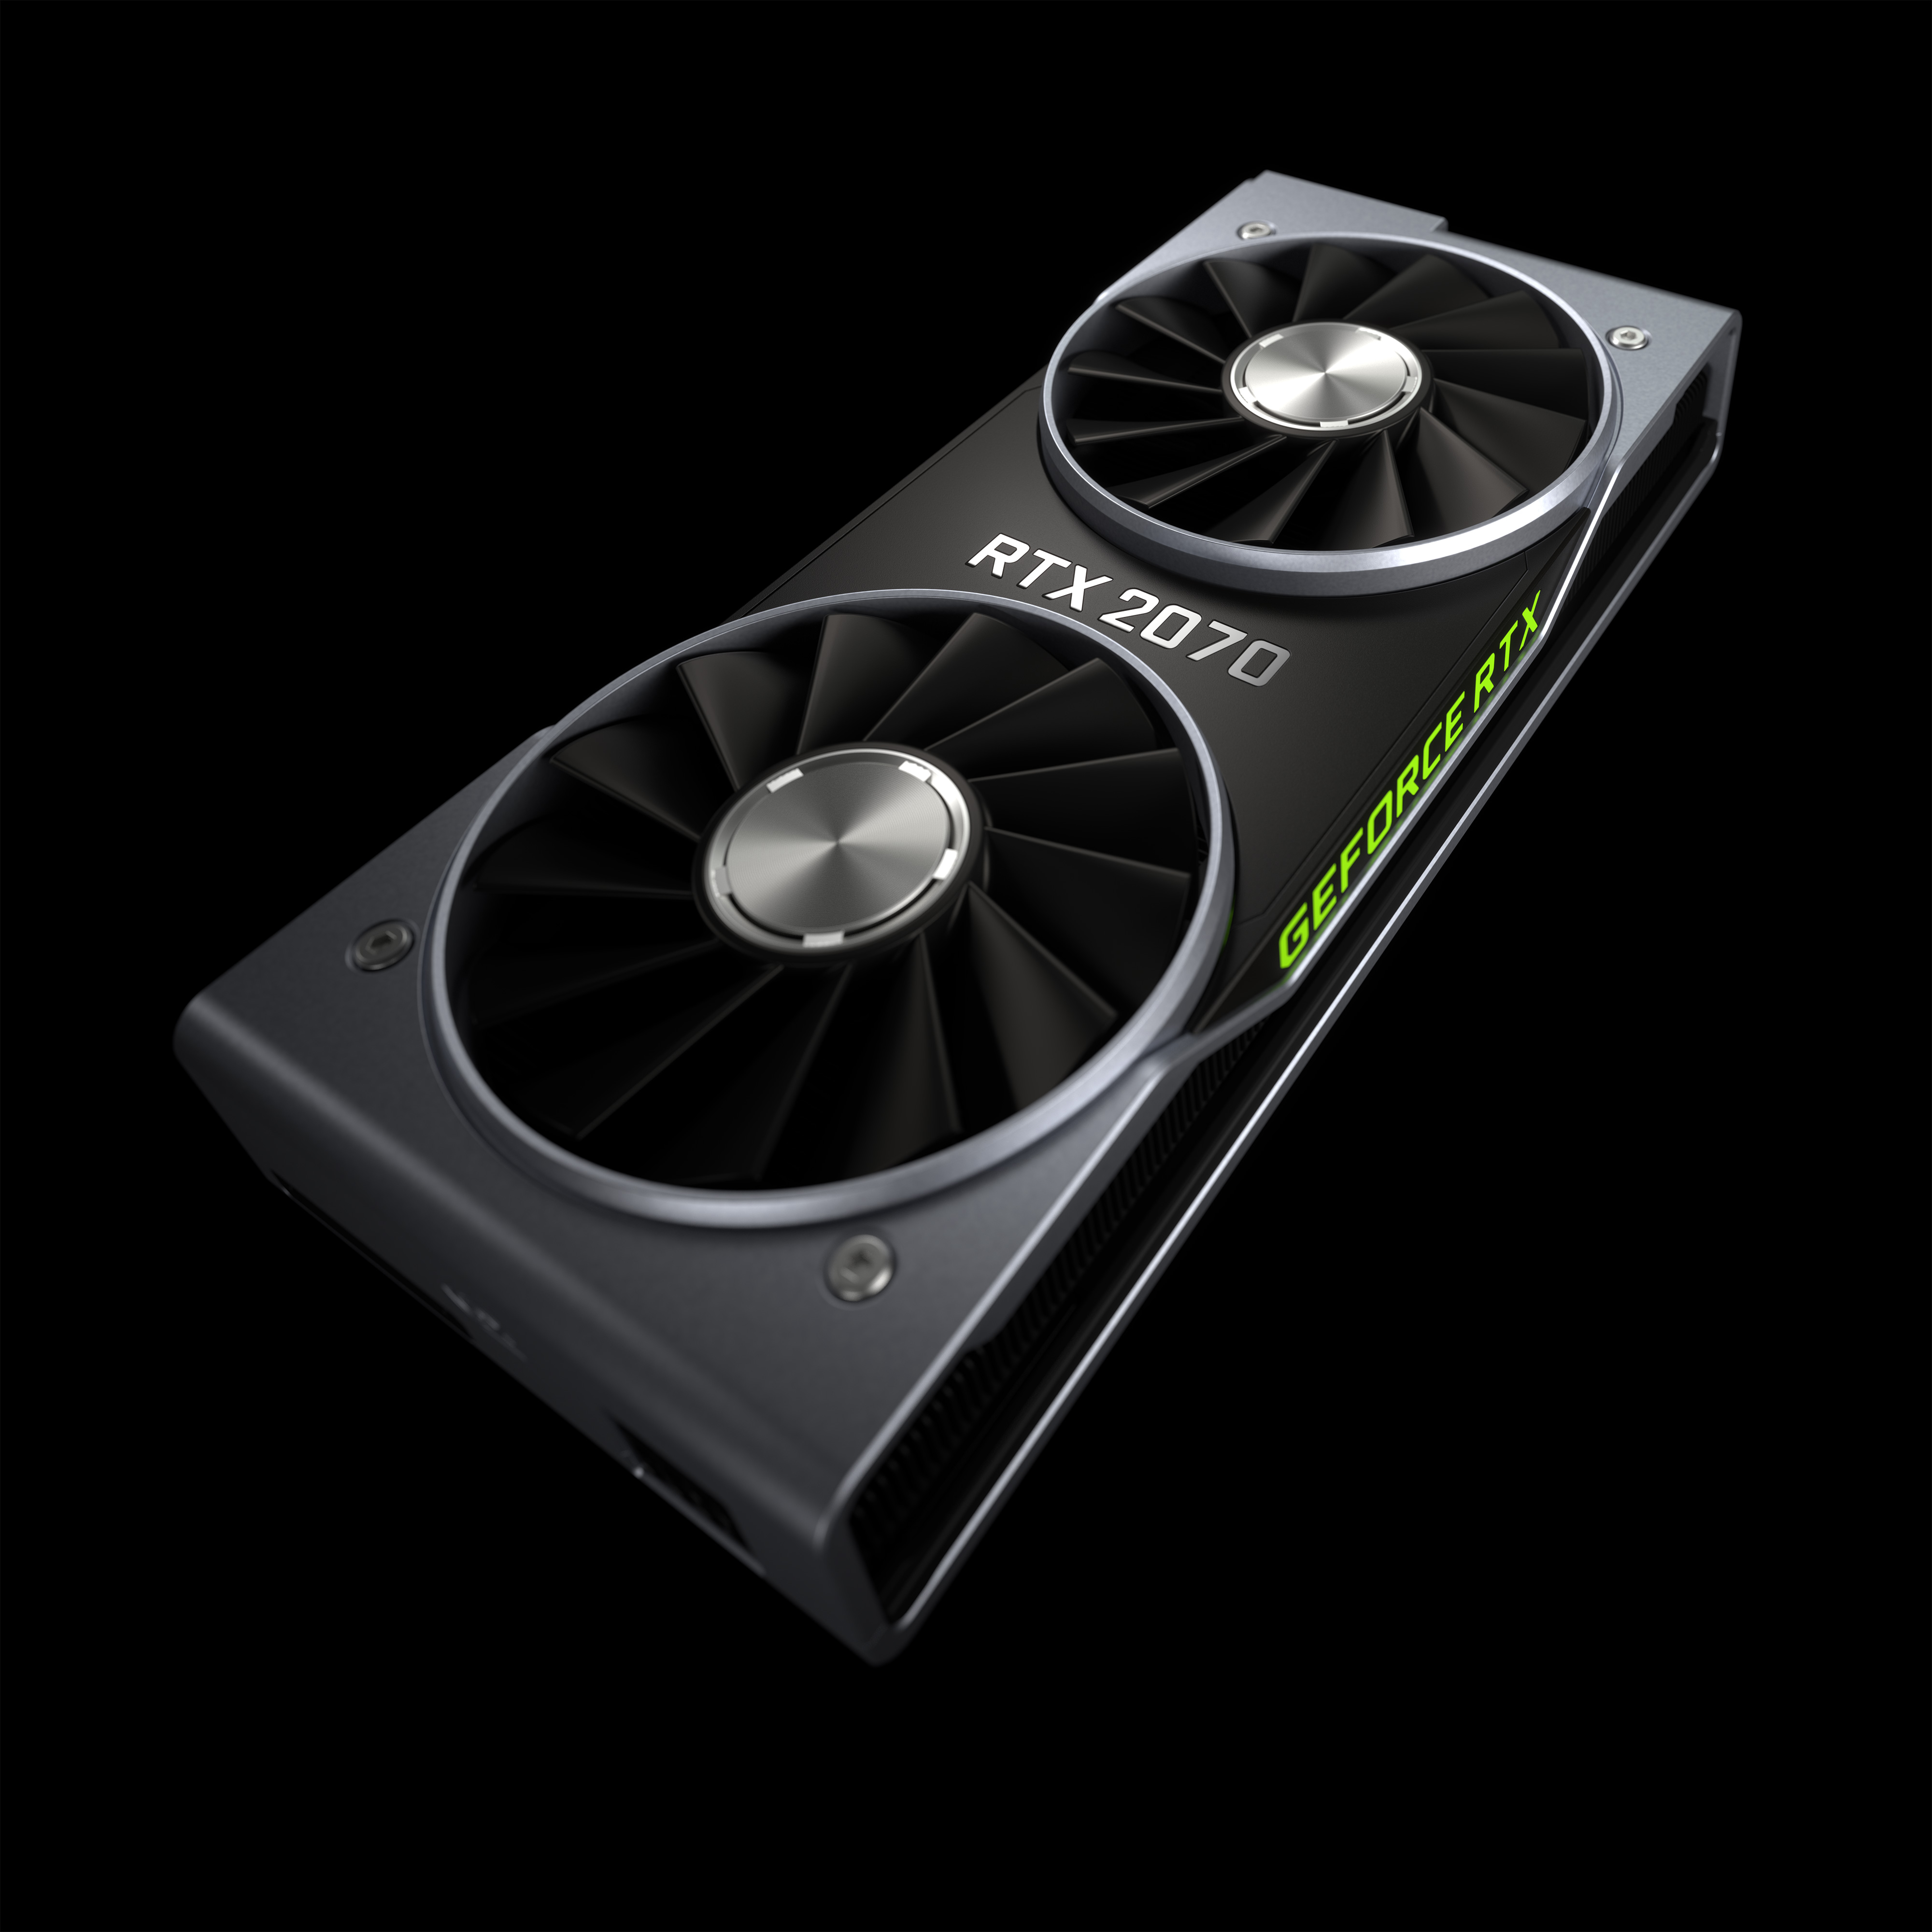 Previewing RTX 2080, RTX 2070, & Pre-Orders - NVIDIA Announces the GeForce RTX Series: RTX 2080 Ti & 2080 on Sept. RTX 2070 in October